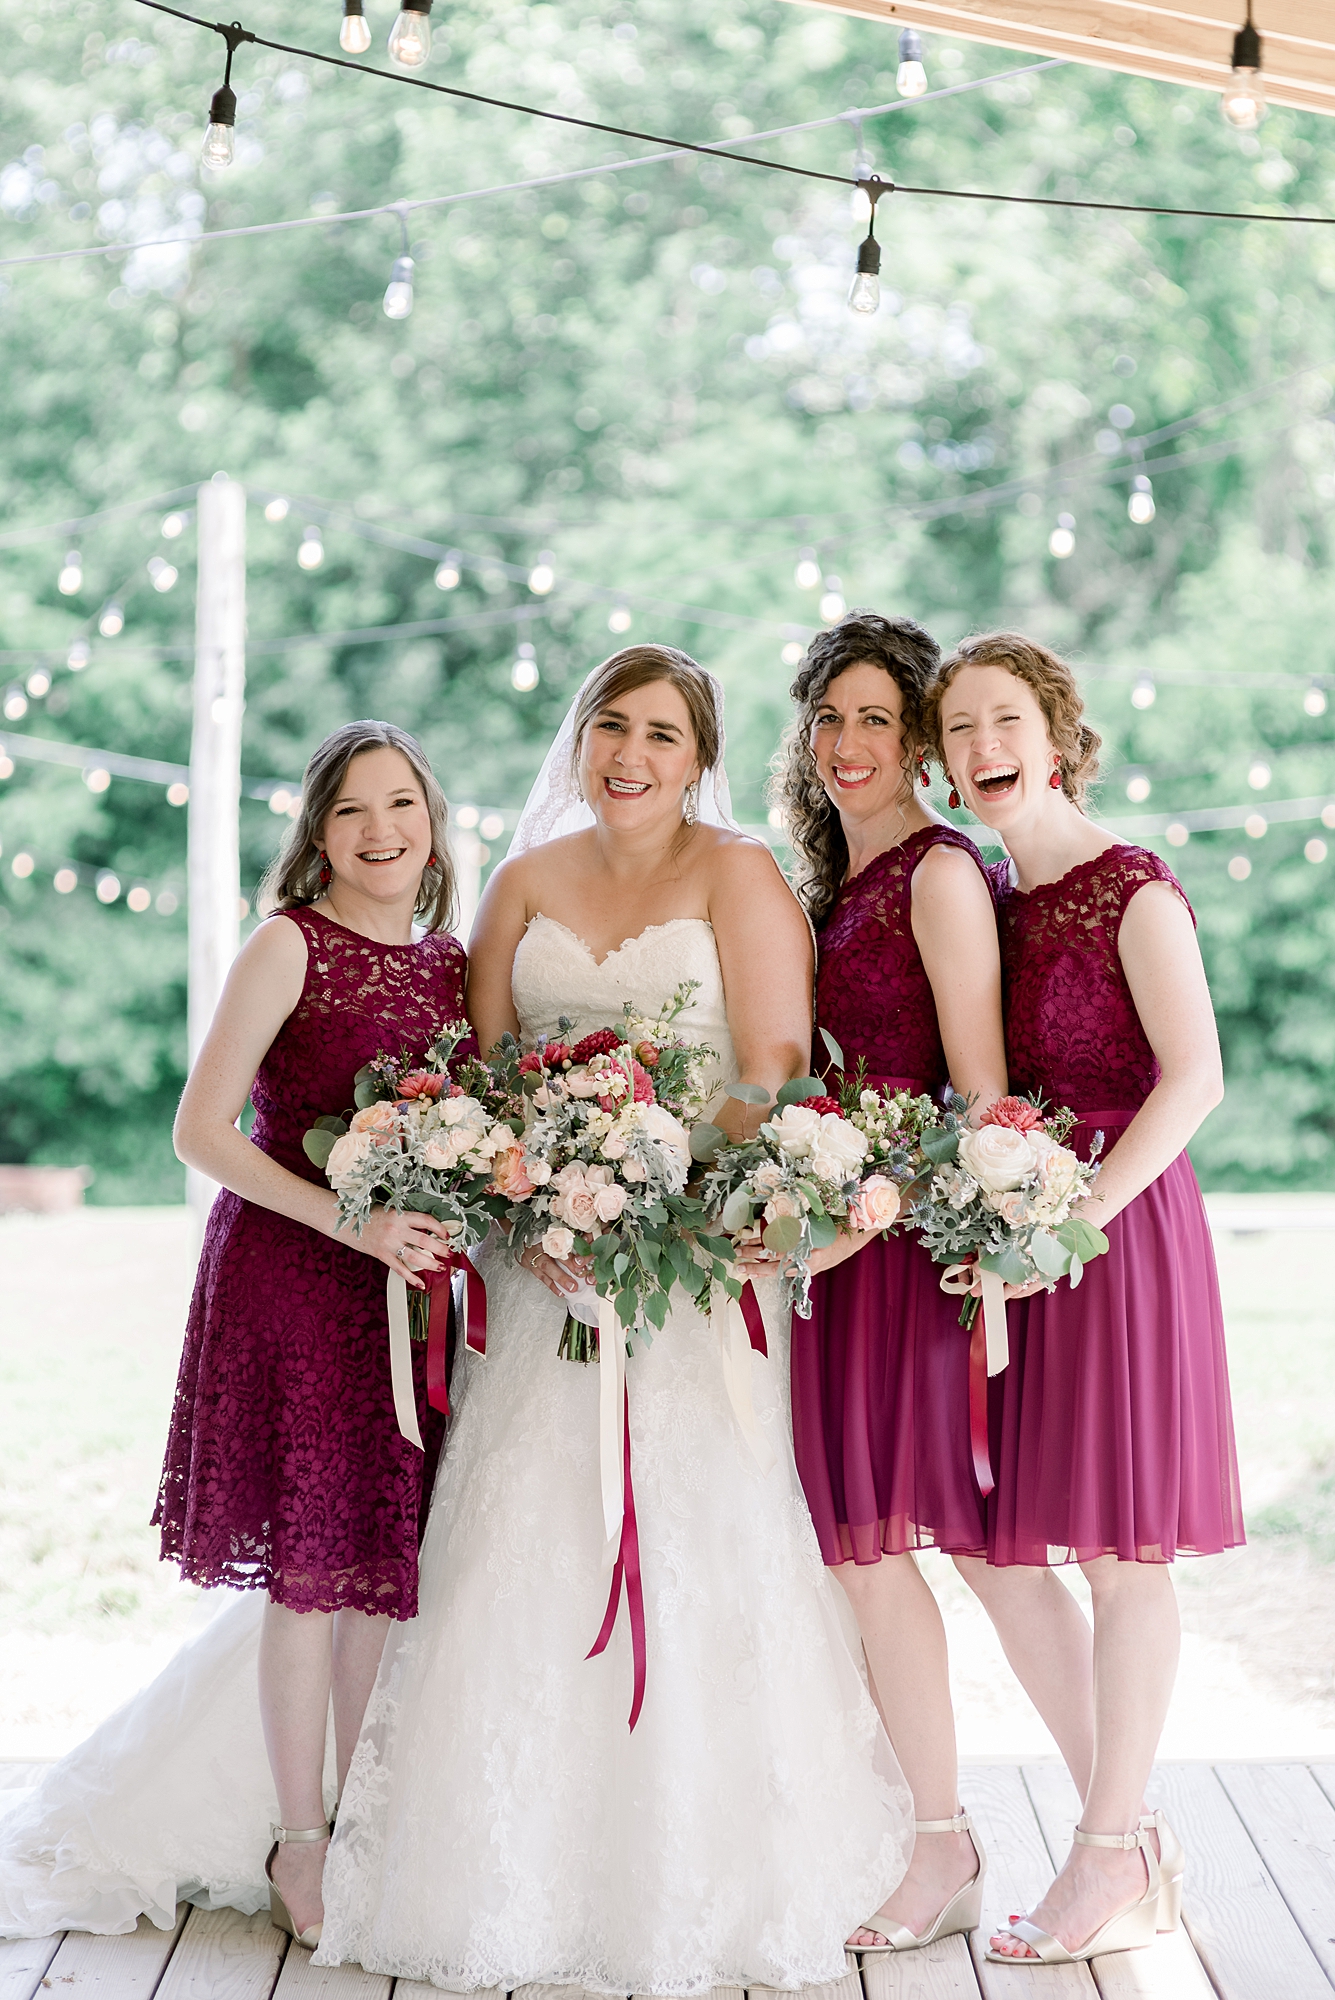 Bride with her Bridesmaids at HIdden Creek Farm Weddings for a Summer June Wedding by Dolly DeLong Photography